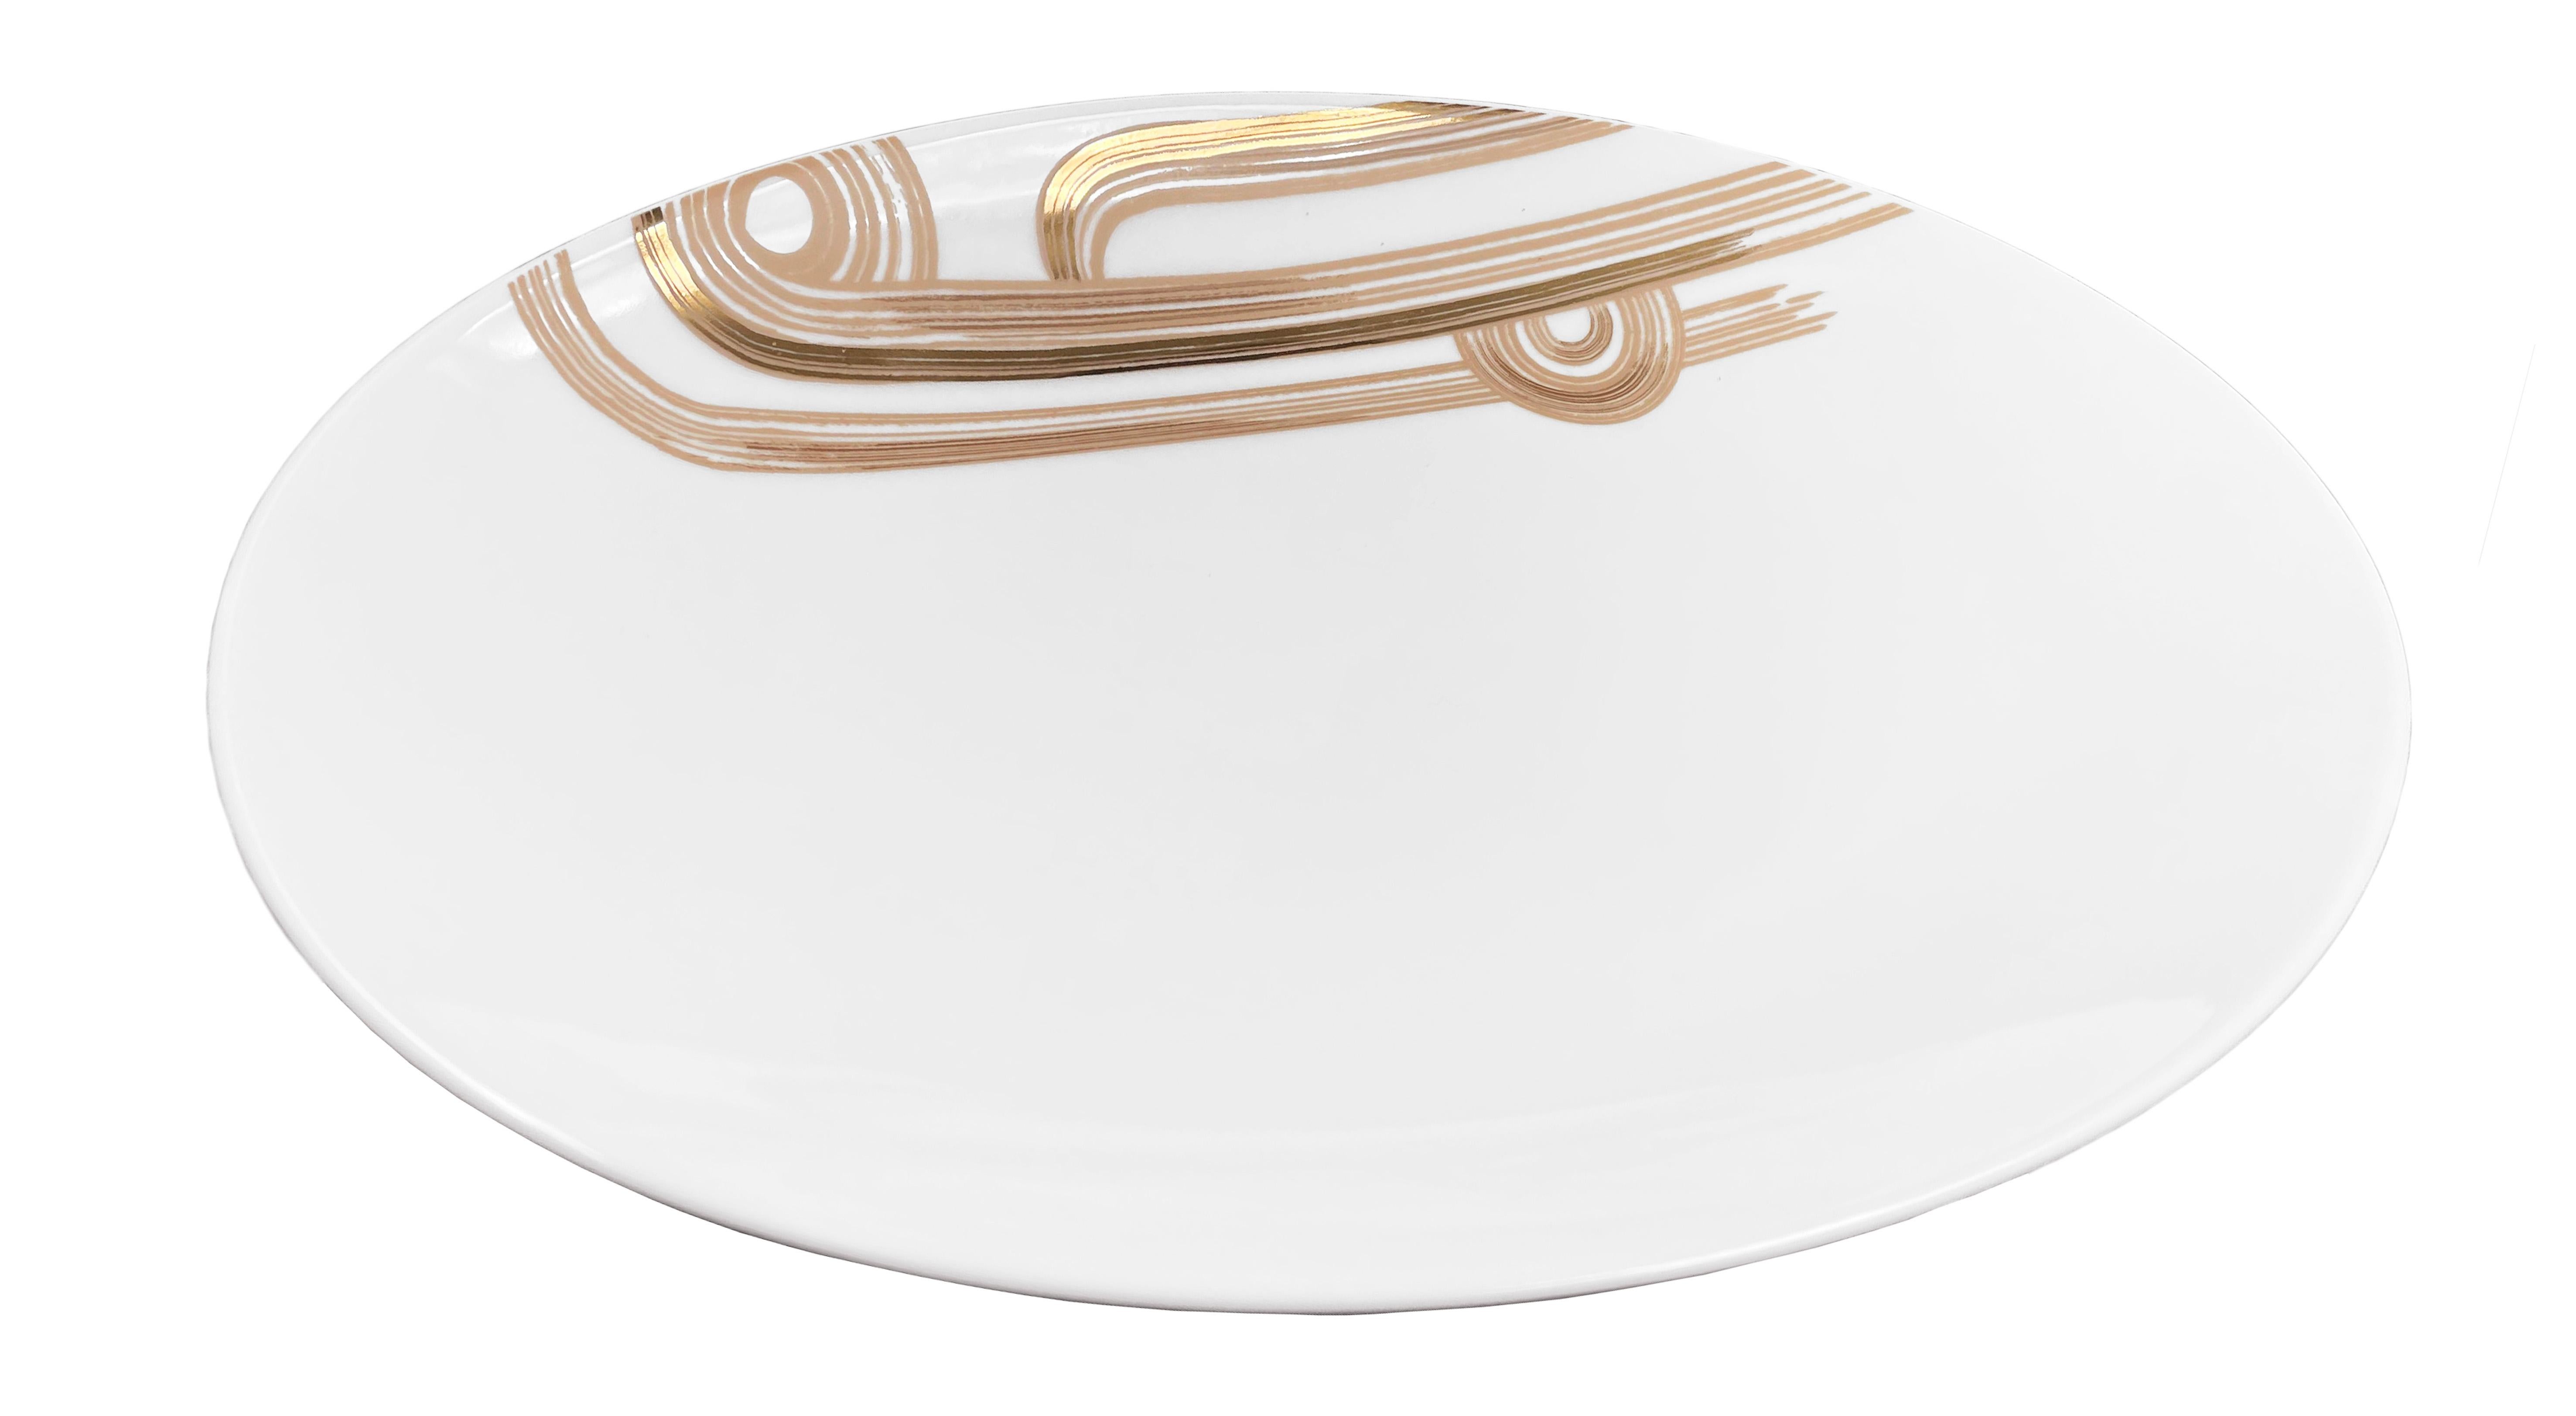 Description: Medium oval serving plate
Color: Beige gold
Size: 31 x 22 x 4 H cm
Material: Porcelain and gold
Collection: Art Déco Garden

Larger quantities available upon request, with 8 weeks production time.